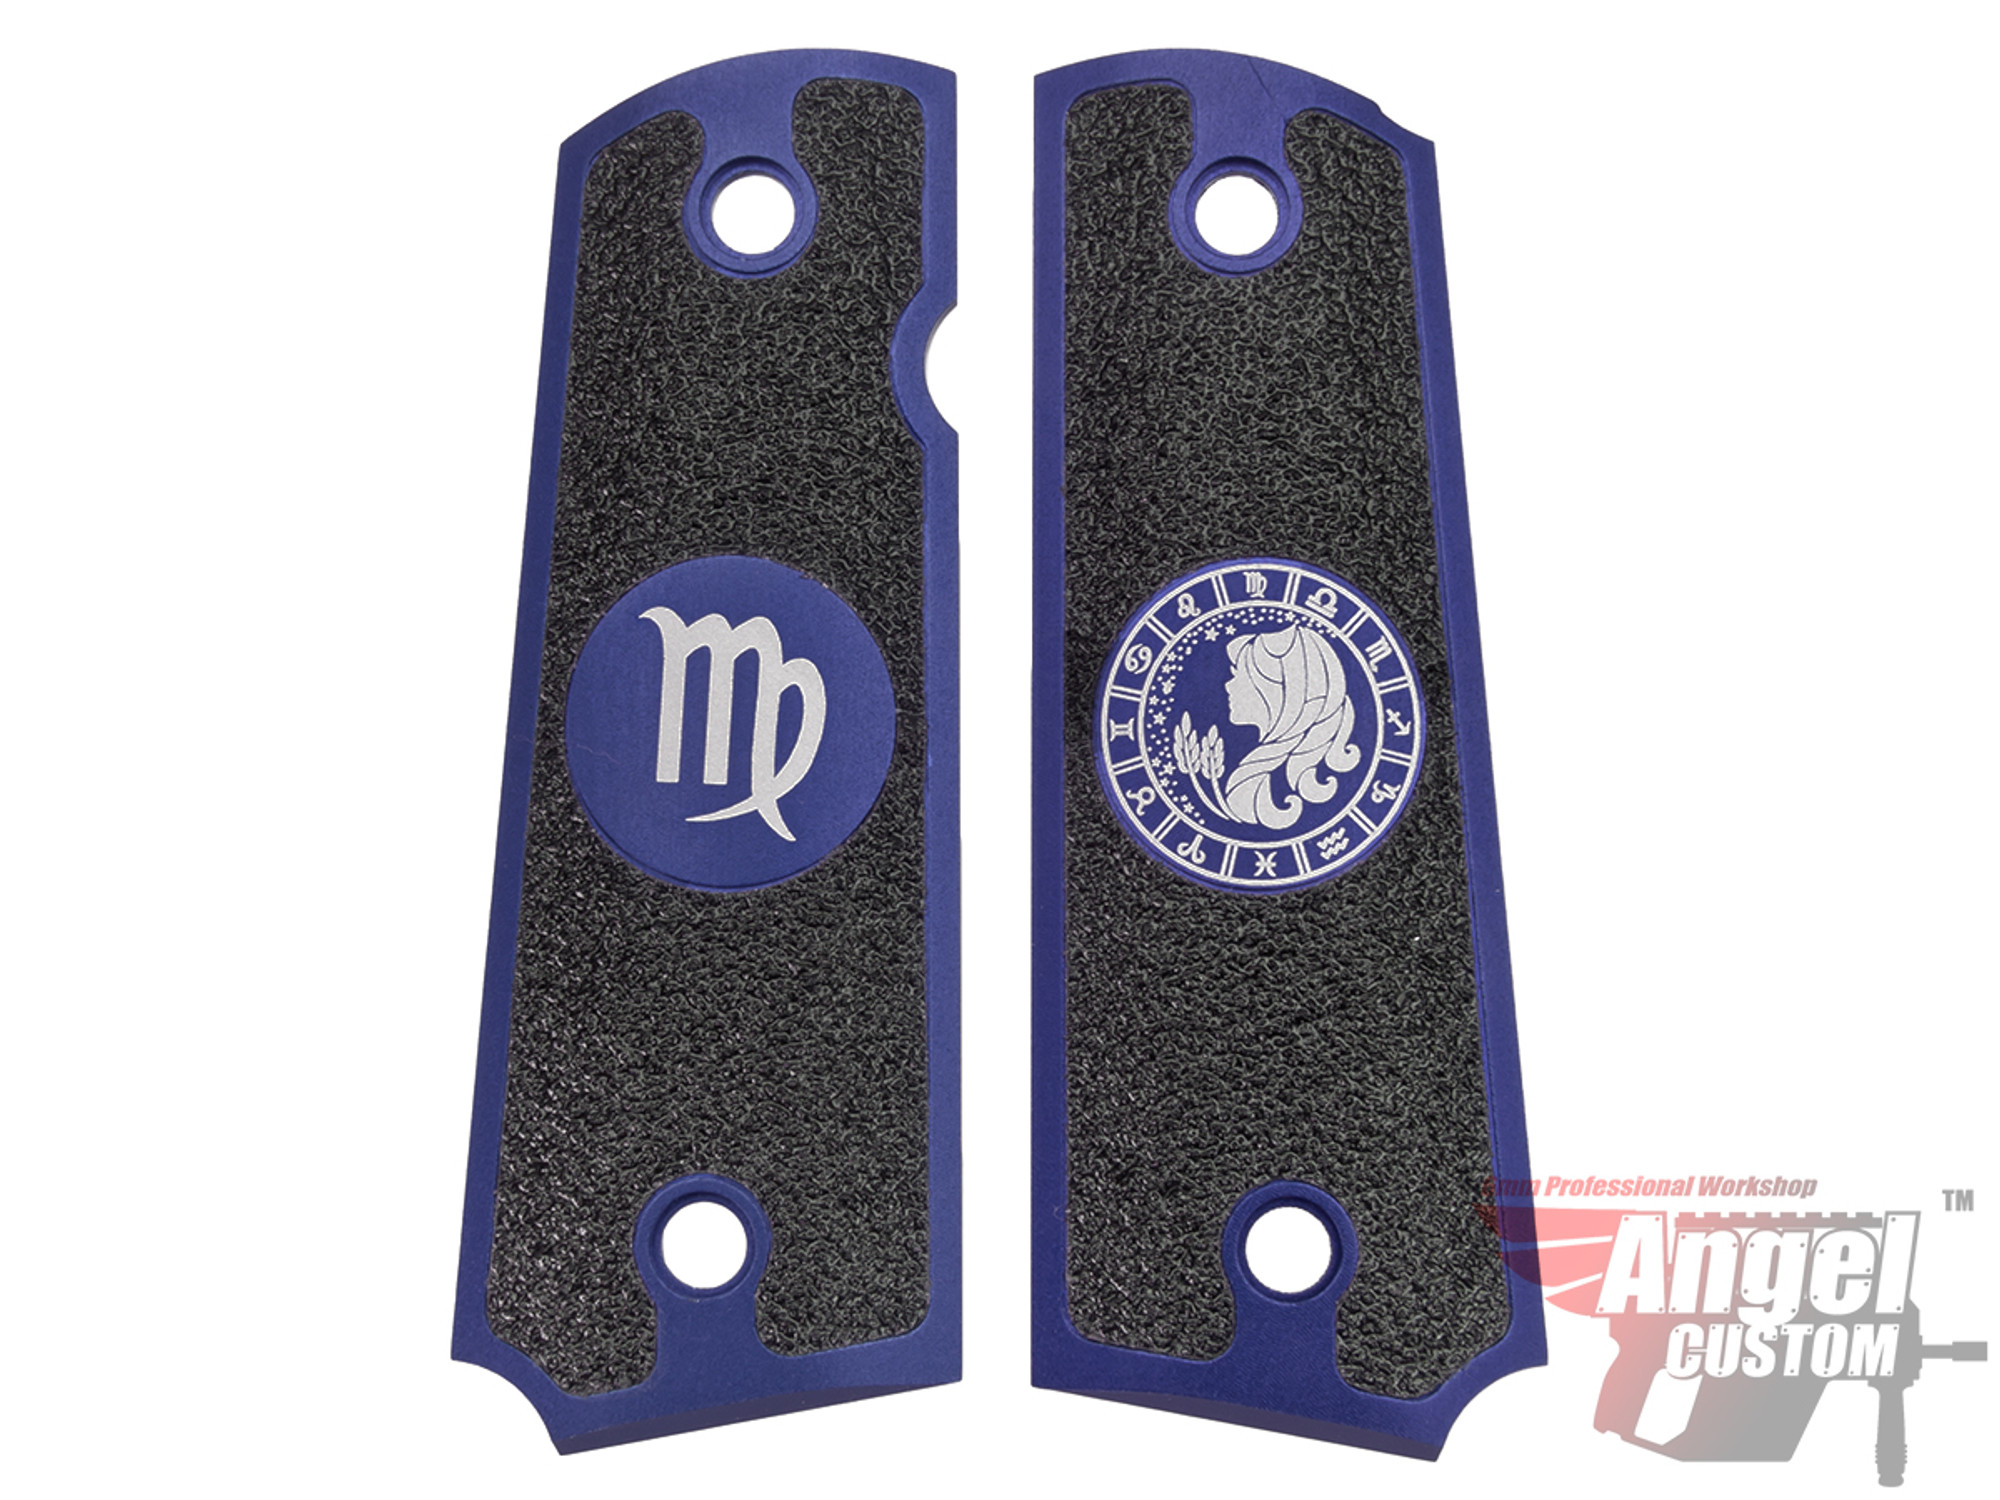 Angel Custom CNC Machined Tac-Glove "Zodiac" Grips for Tokyo Marui/KWA/Western Arms 1911 Series Airsoft Pistols - Navy Blue (Sign: Virgo)